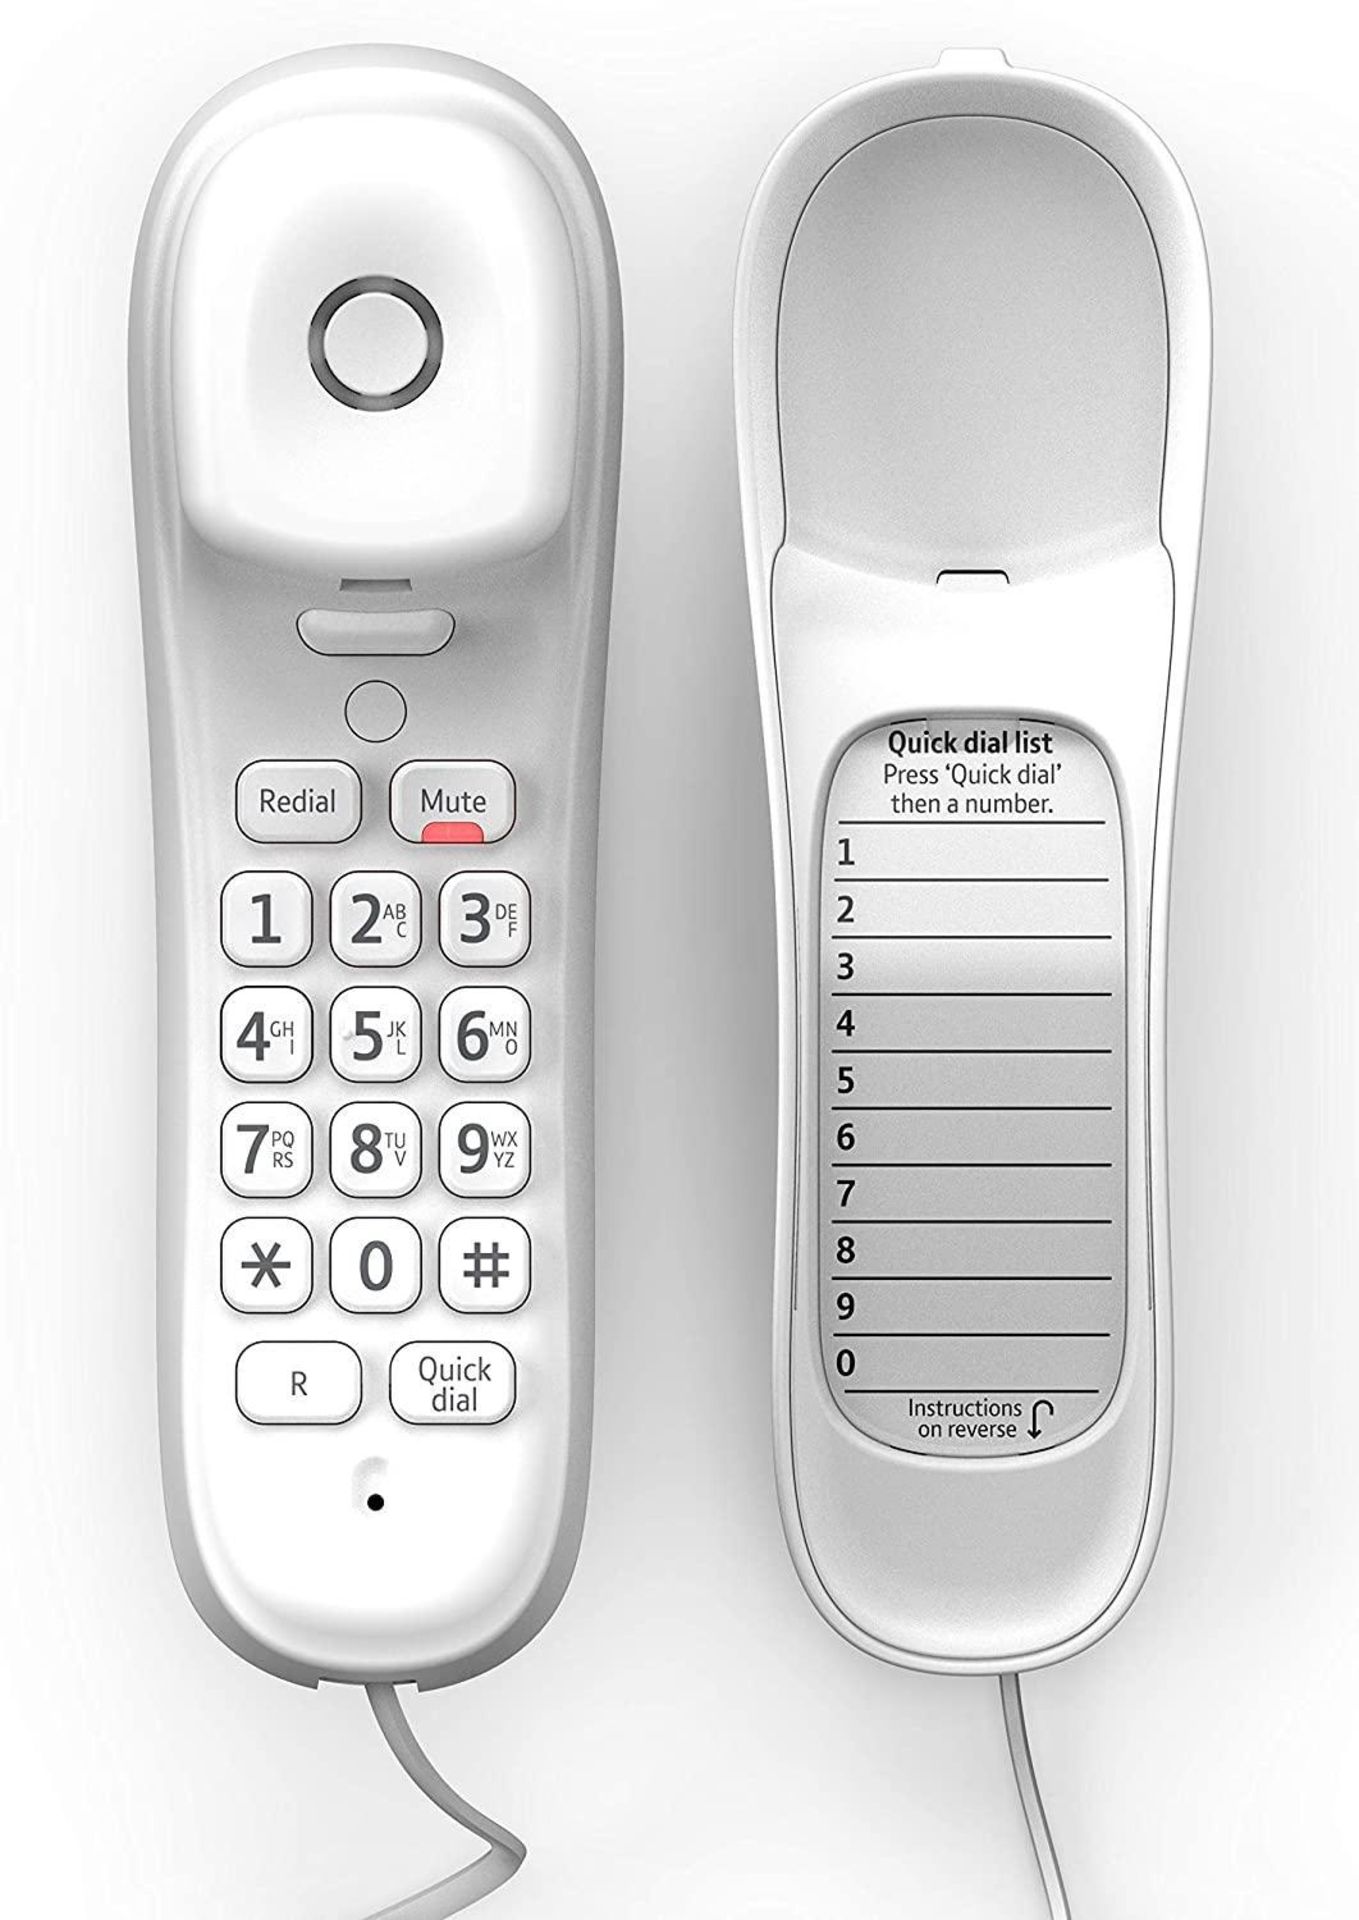 BT Duet 210 Corded Telephone, White £11.99 RRP - Image 2 of 5